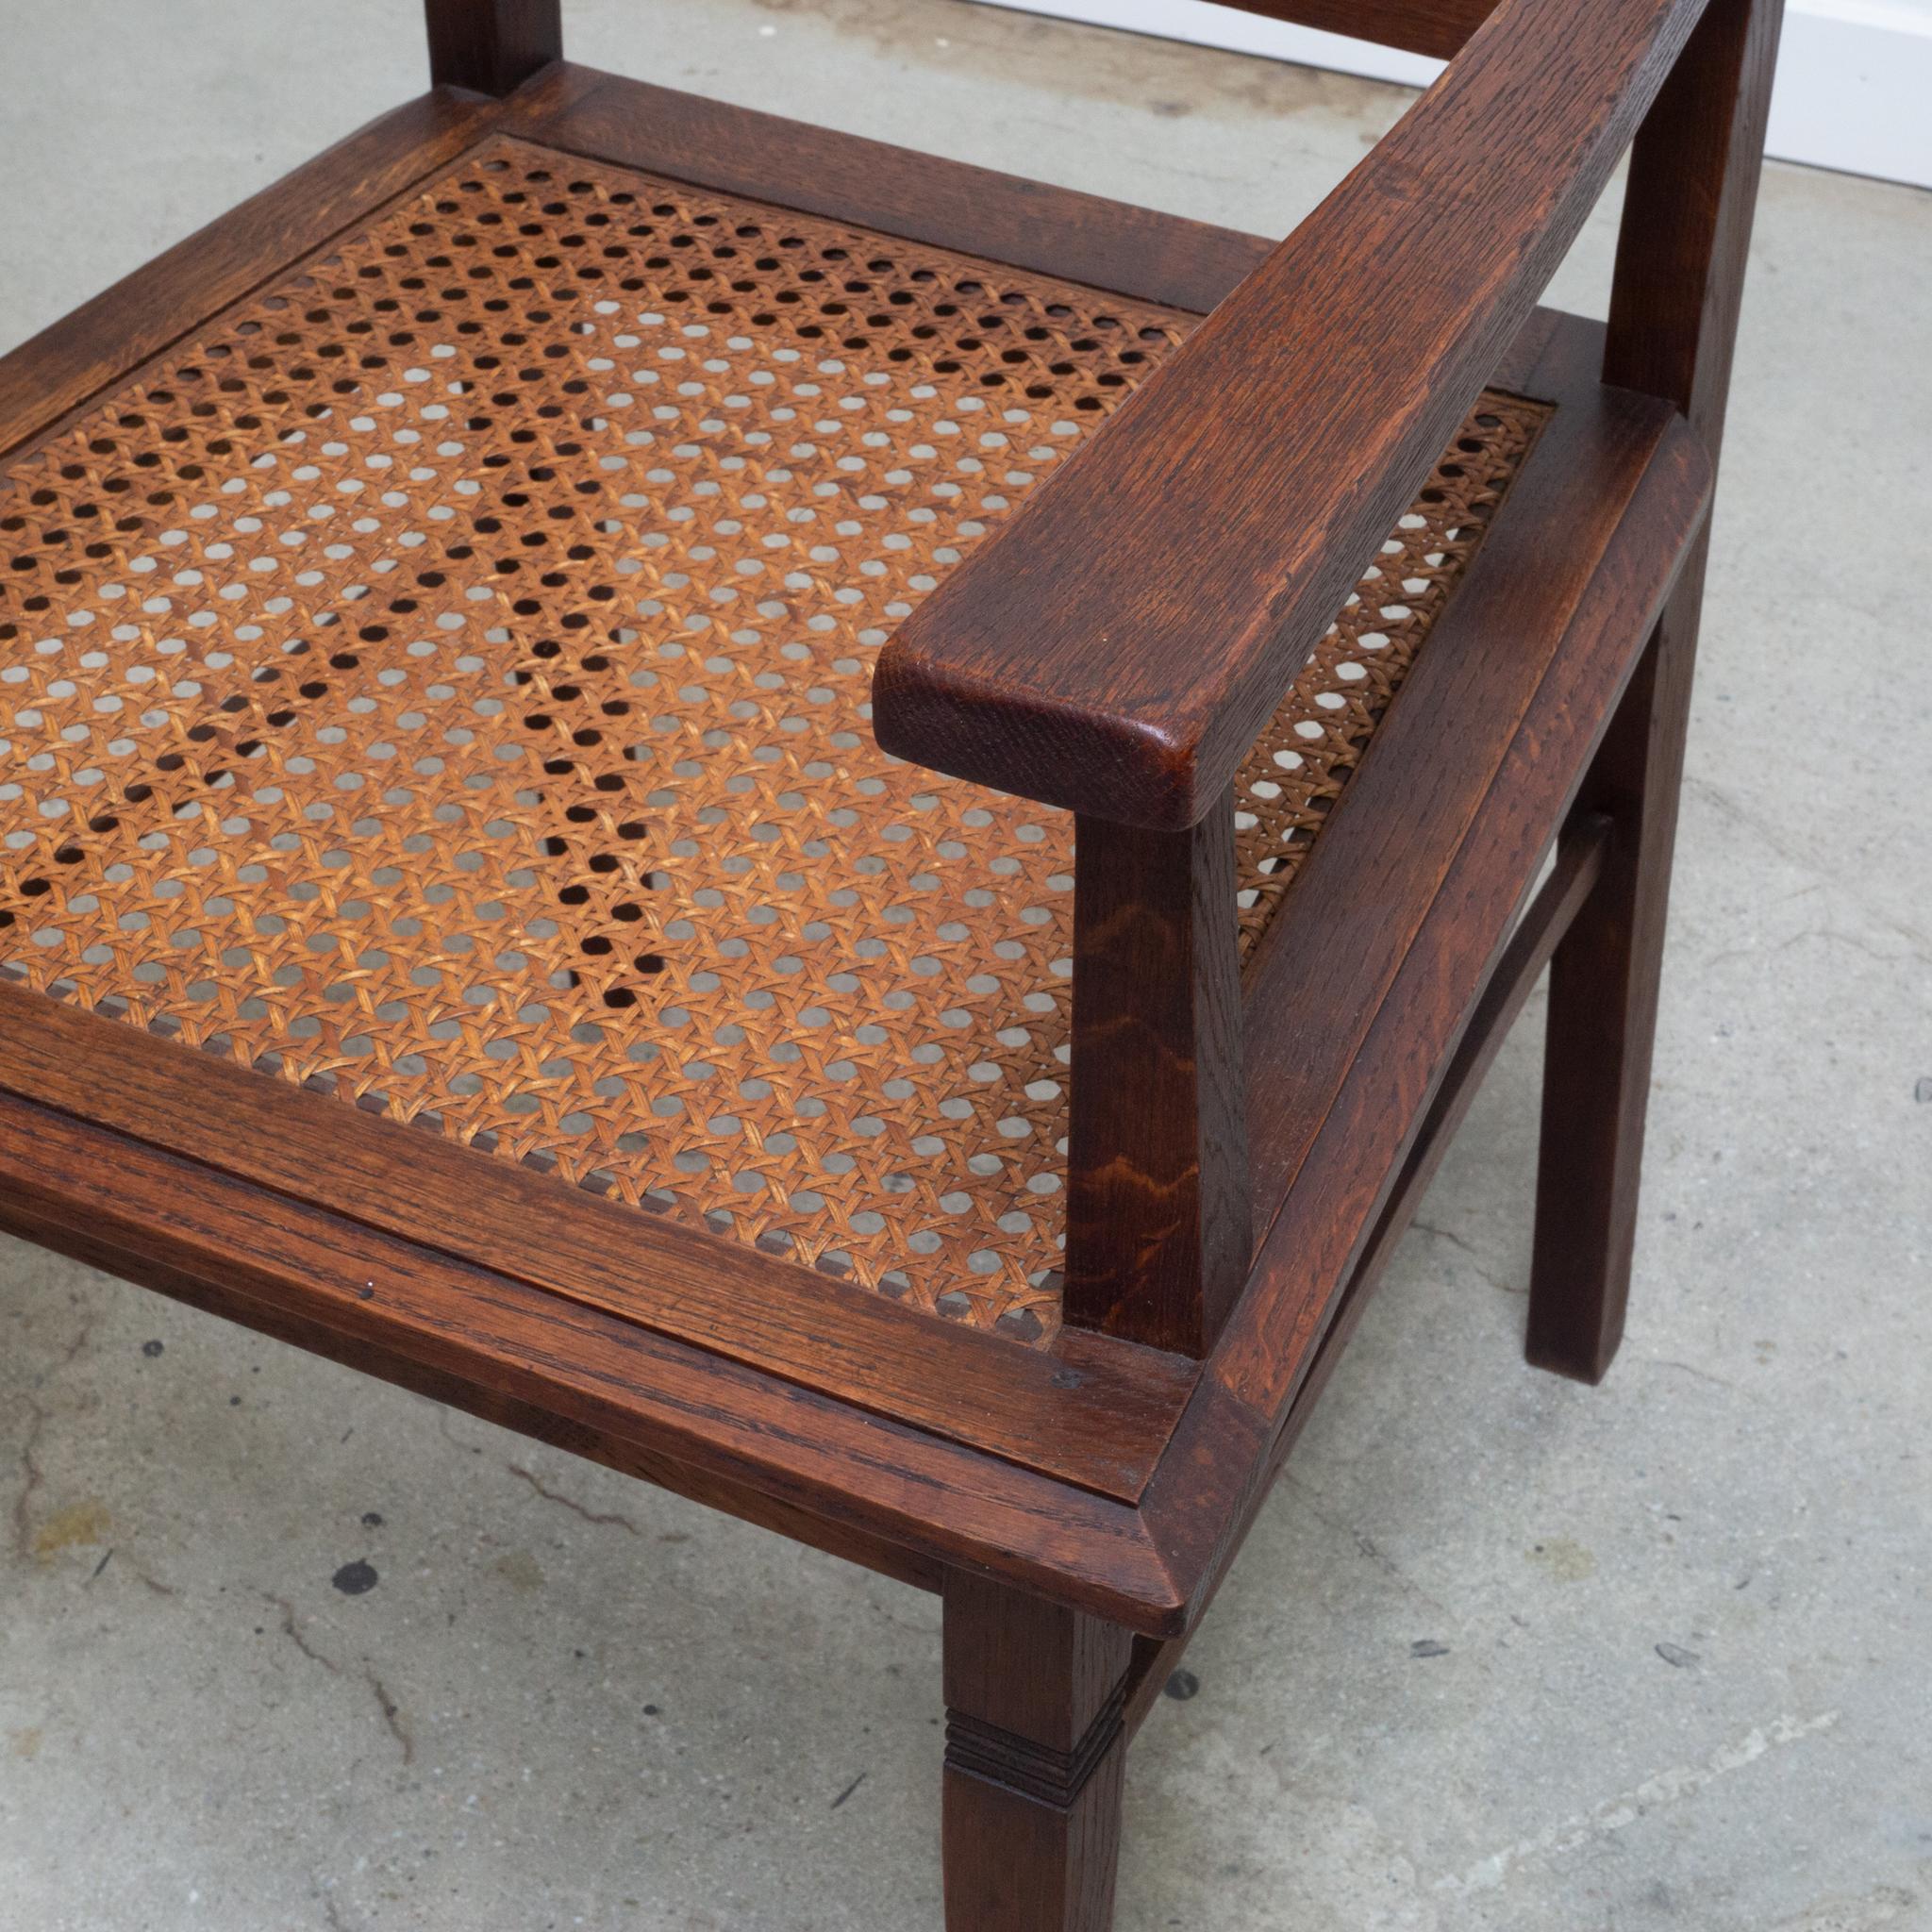 Early 20th C. Glasgow Style Arts and Crafts Caned Oak Arm Chair, c.1900 For Sale 1